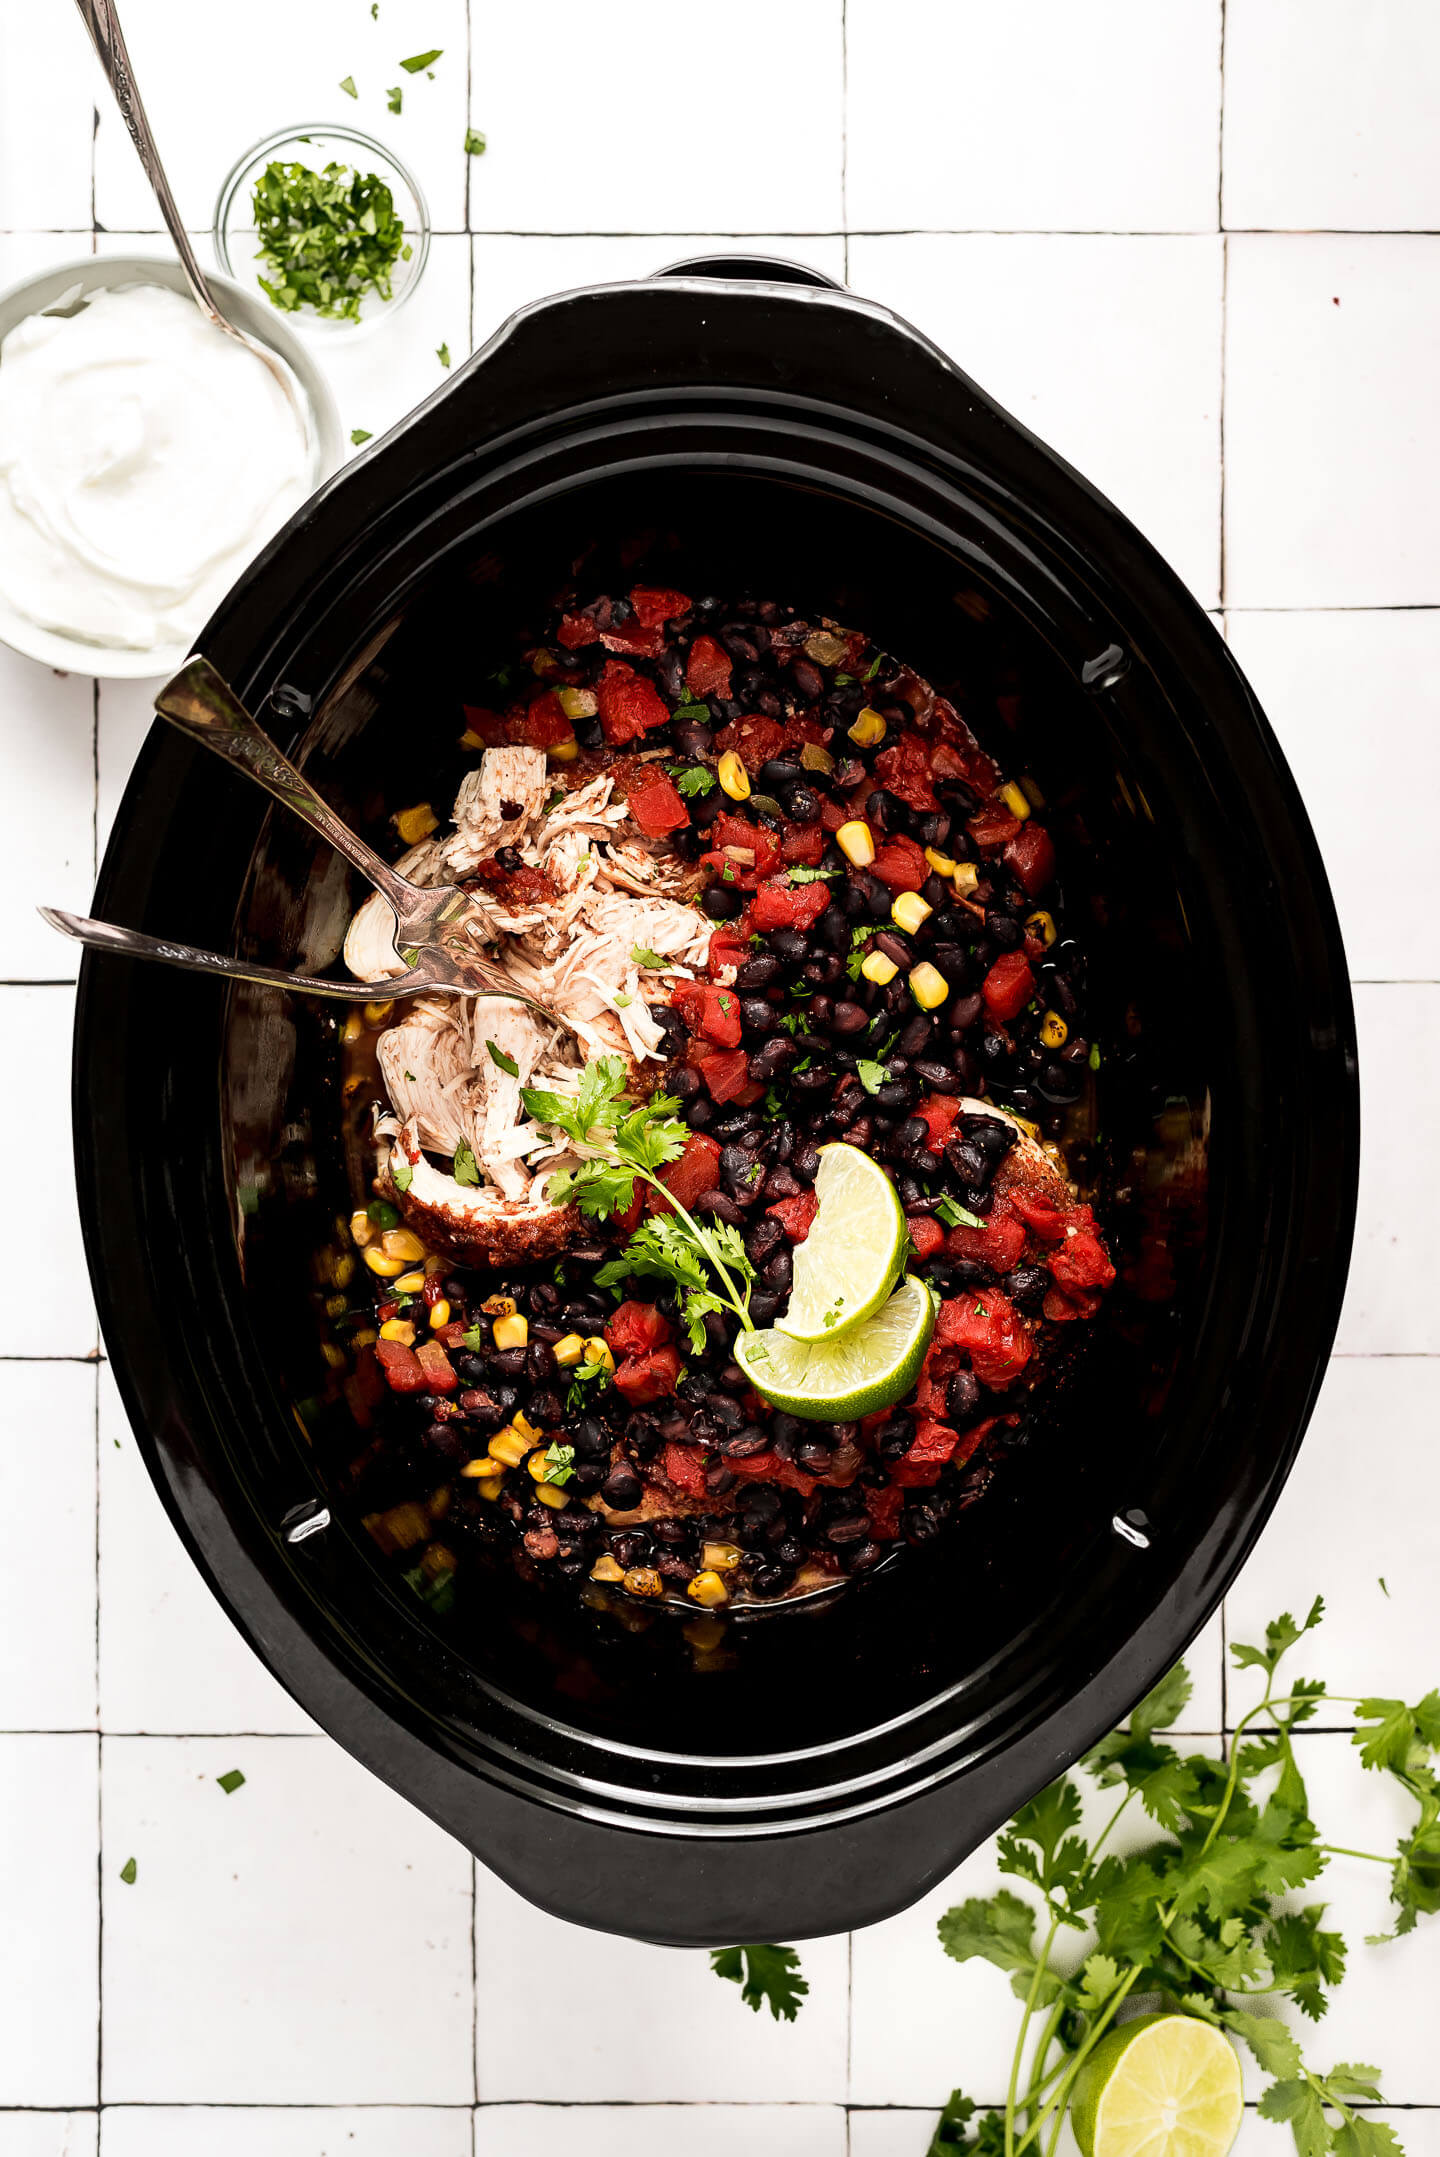 Shredding chicken in a slow cooker with tomatoes, black beans, and corn.